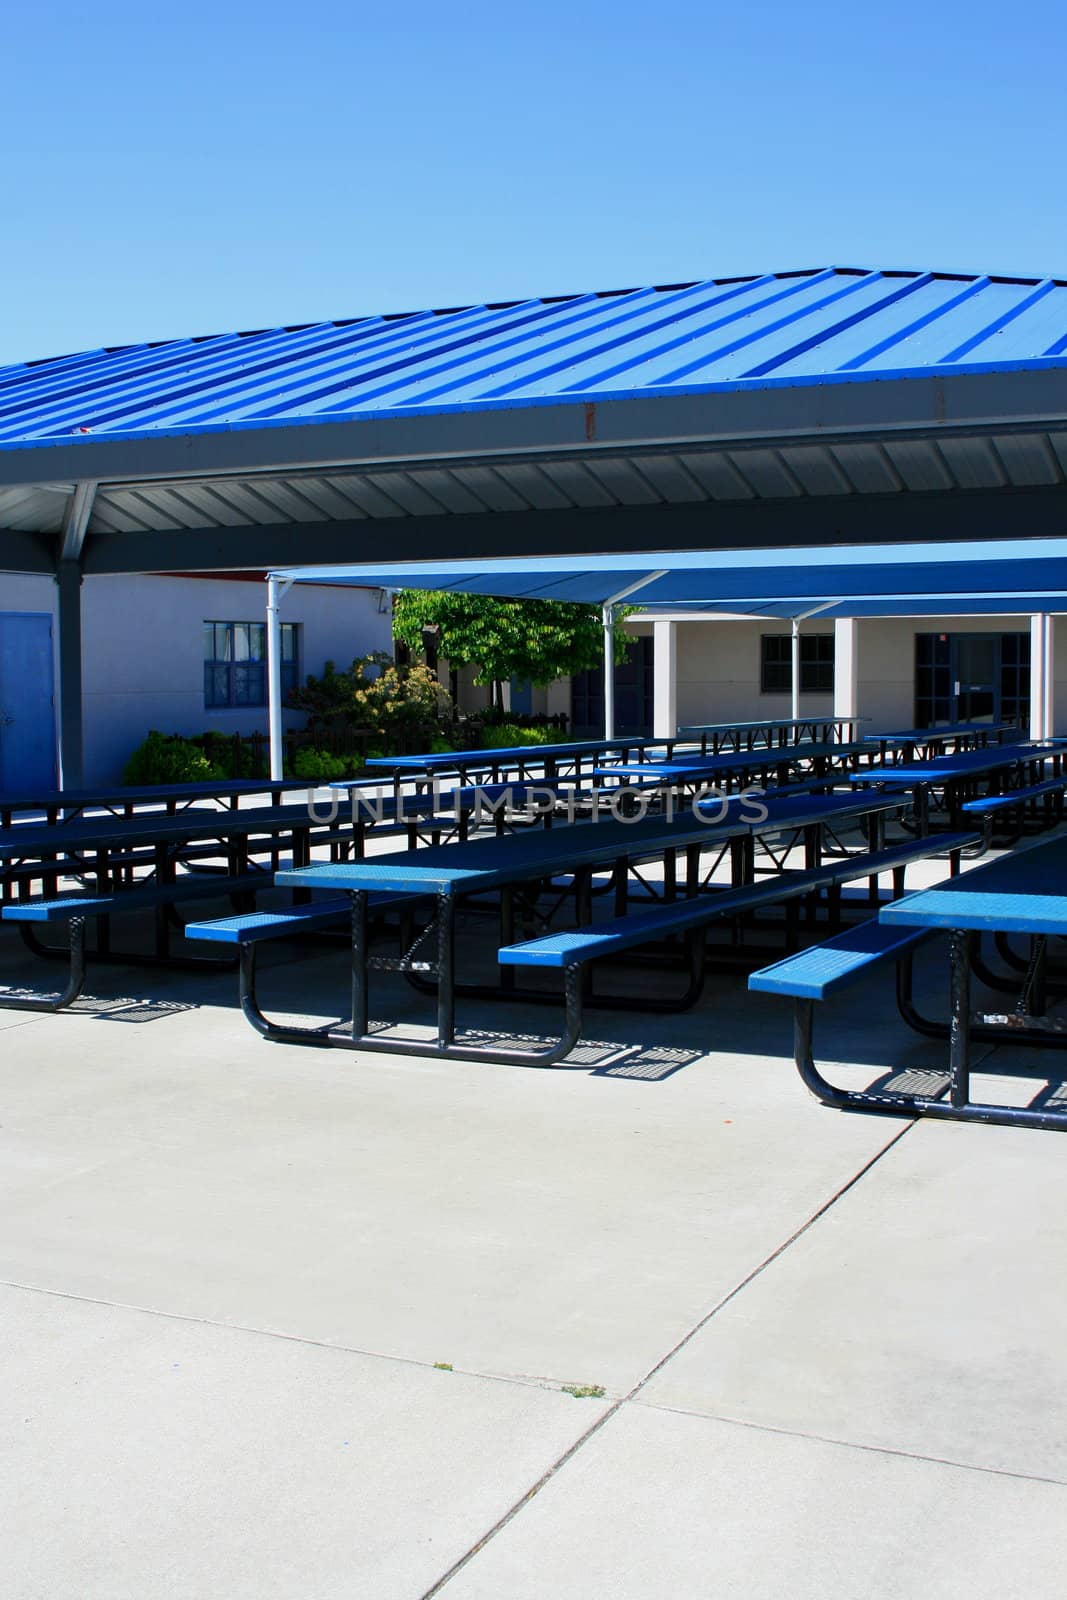 New outdoor cafeteria on a sunny day.
